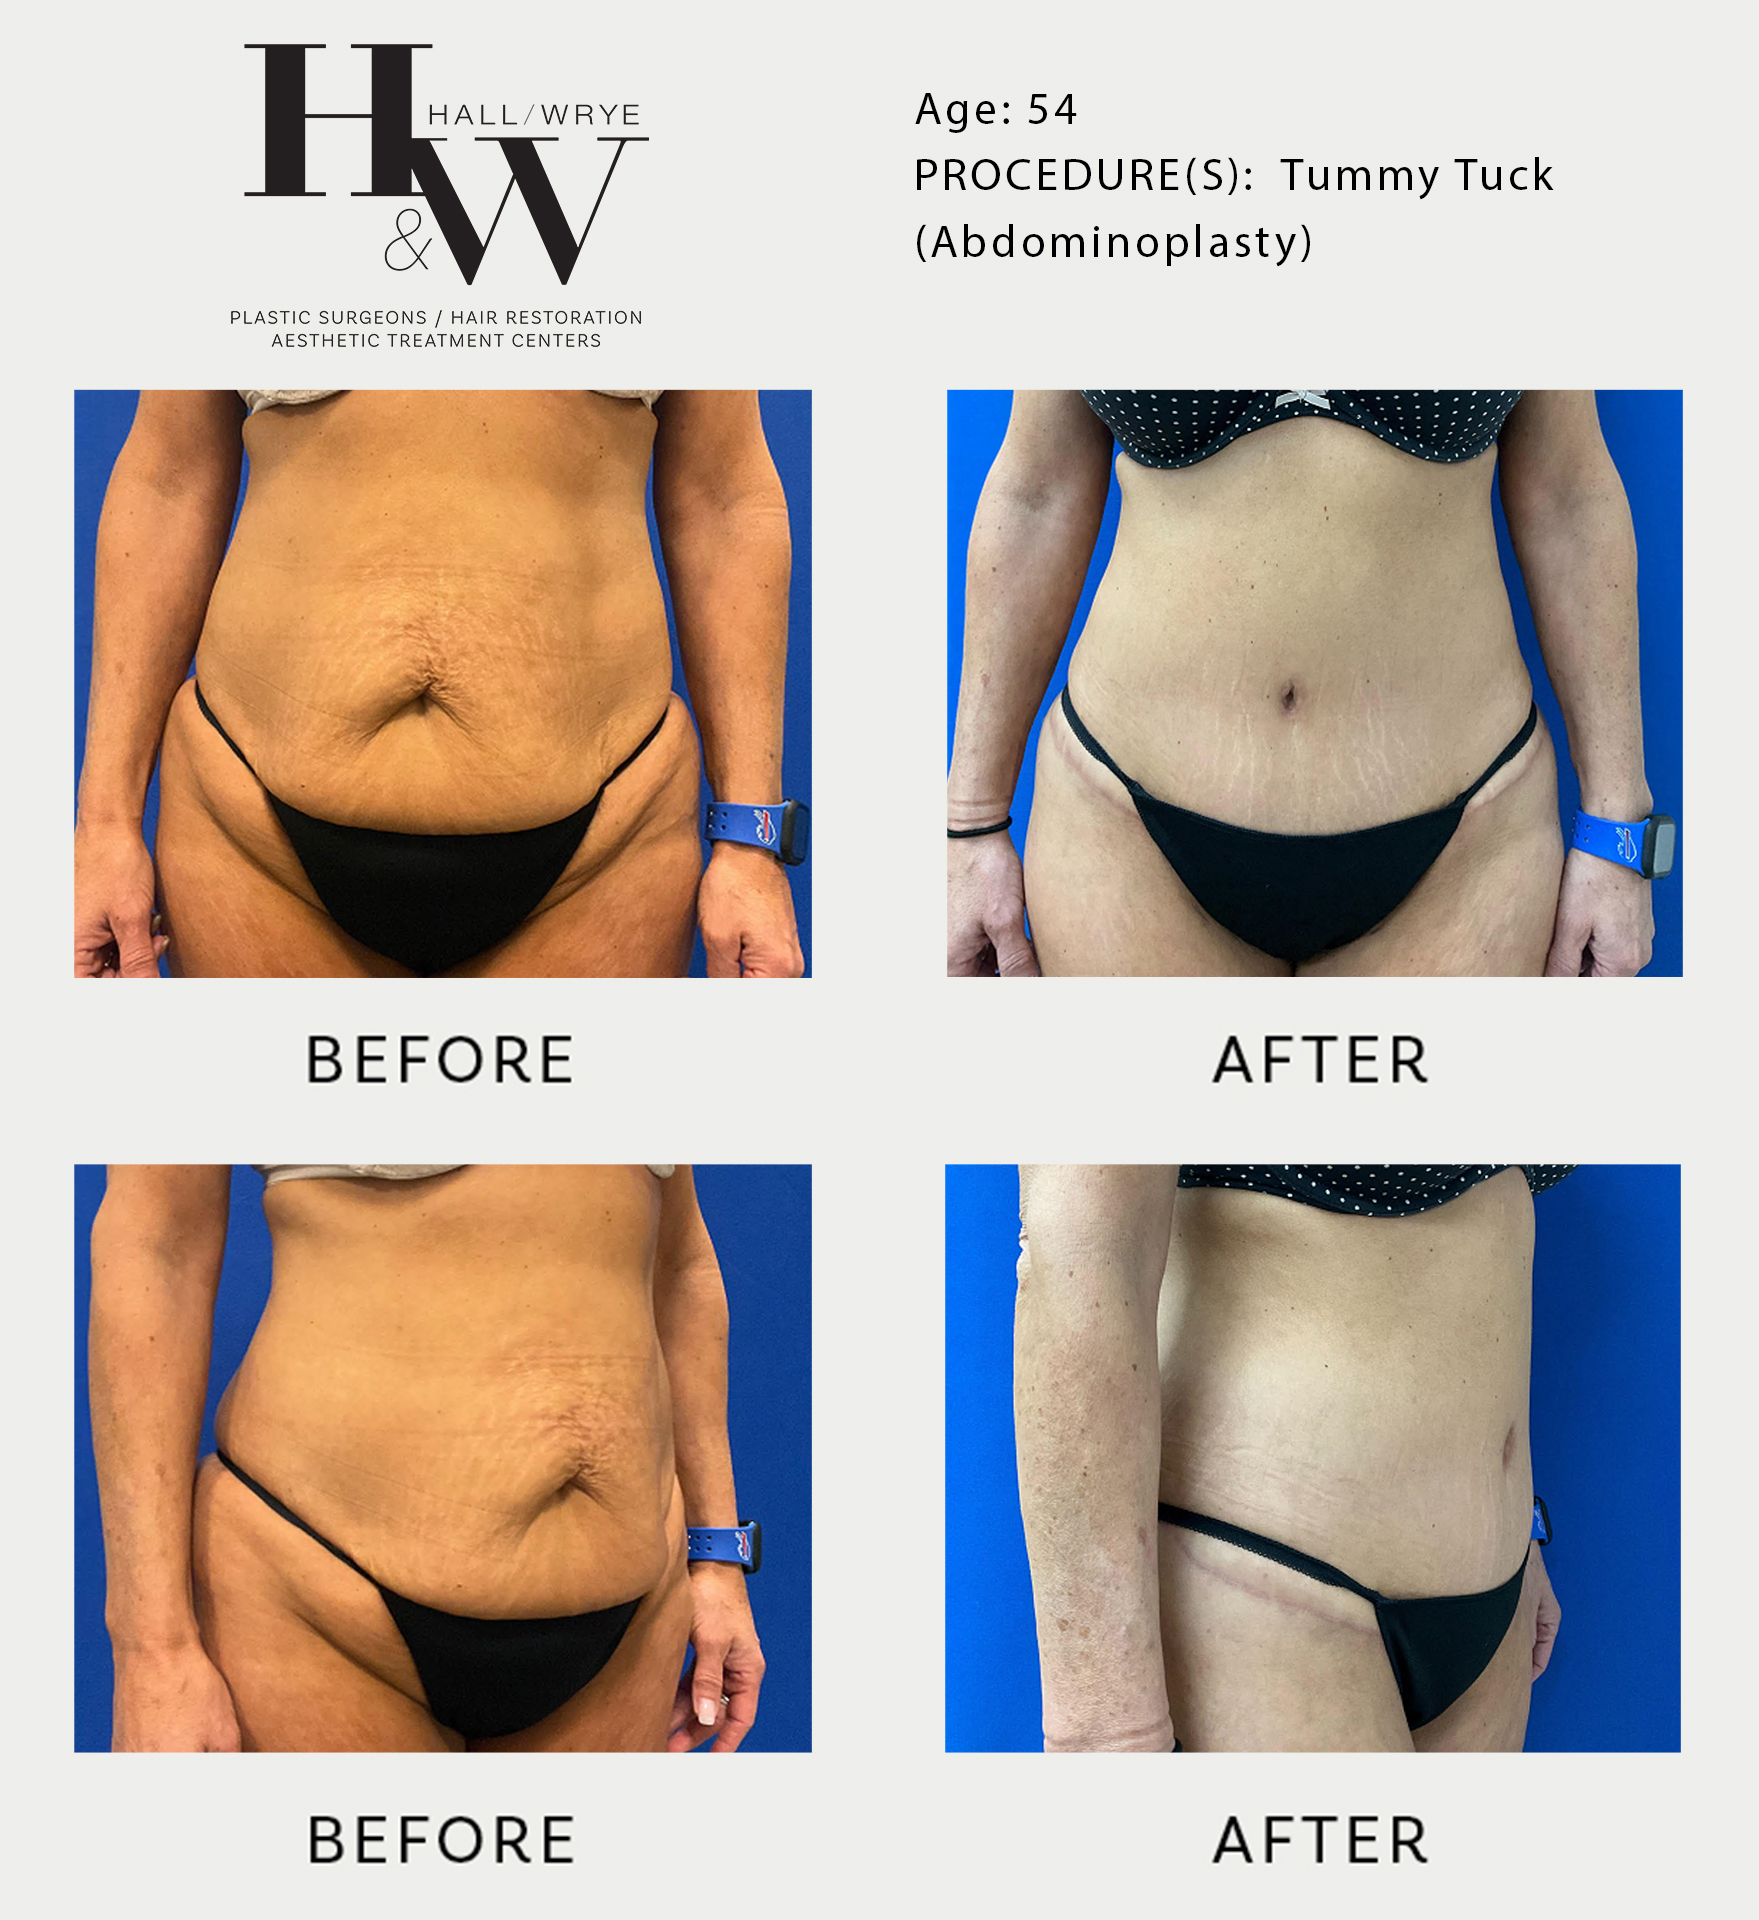 TUMMY TUCK (ABDOMINOPLASTY) - Hall & Wrye – Plastic Surgery and Medical Spa  in Reno NV, Breast Implants and Breast Augmentation, Liposuction, Tummy- Tucks, Dermal Fillers, Hair Transplants and more! Licensed Reno Plastic